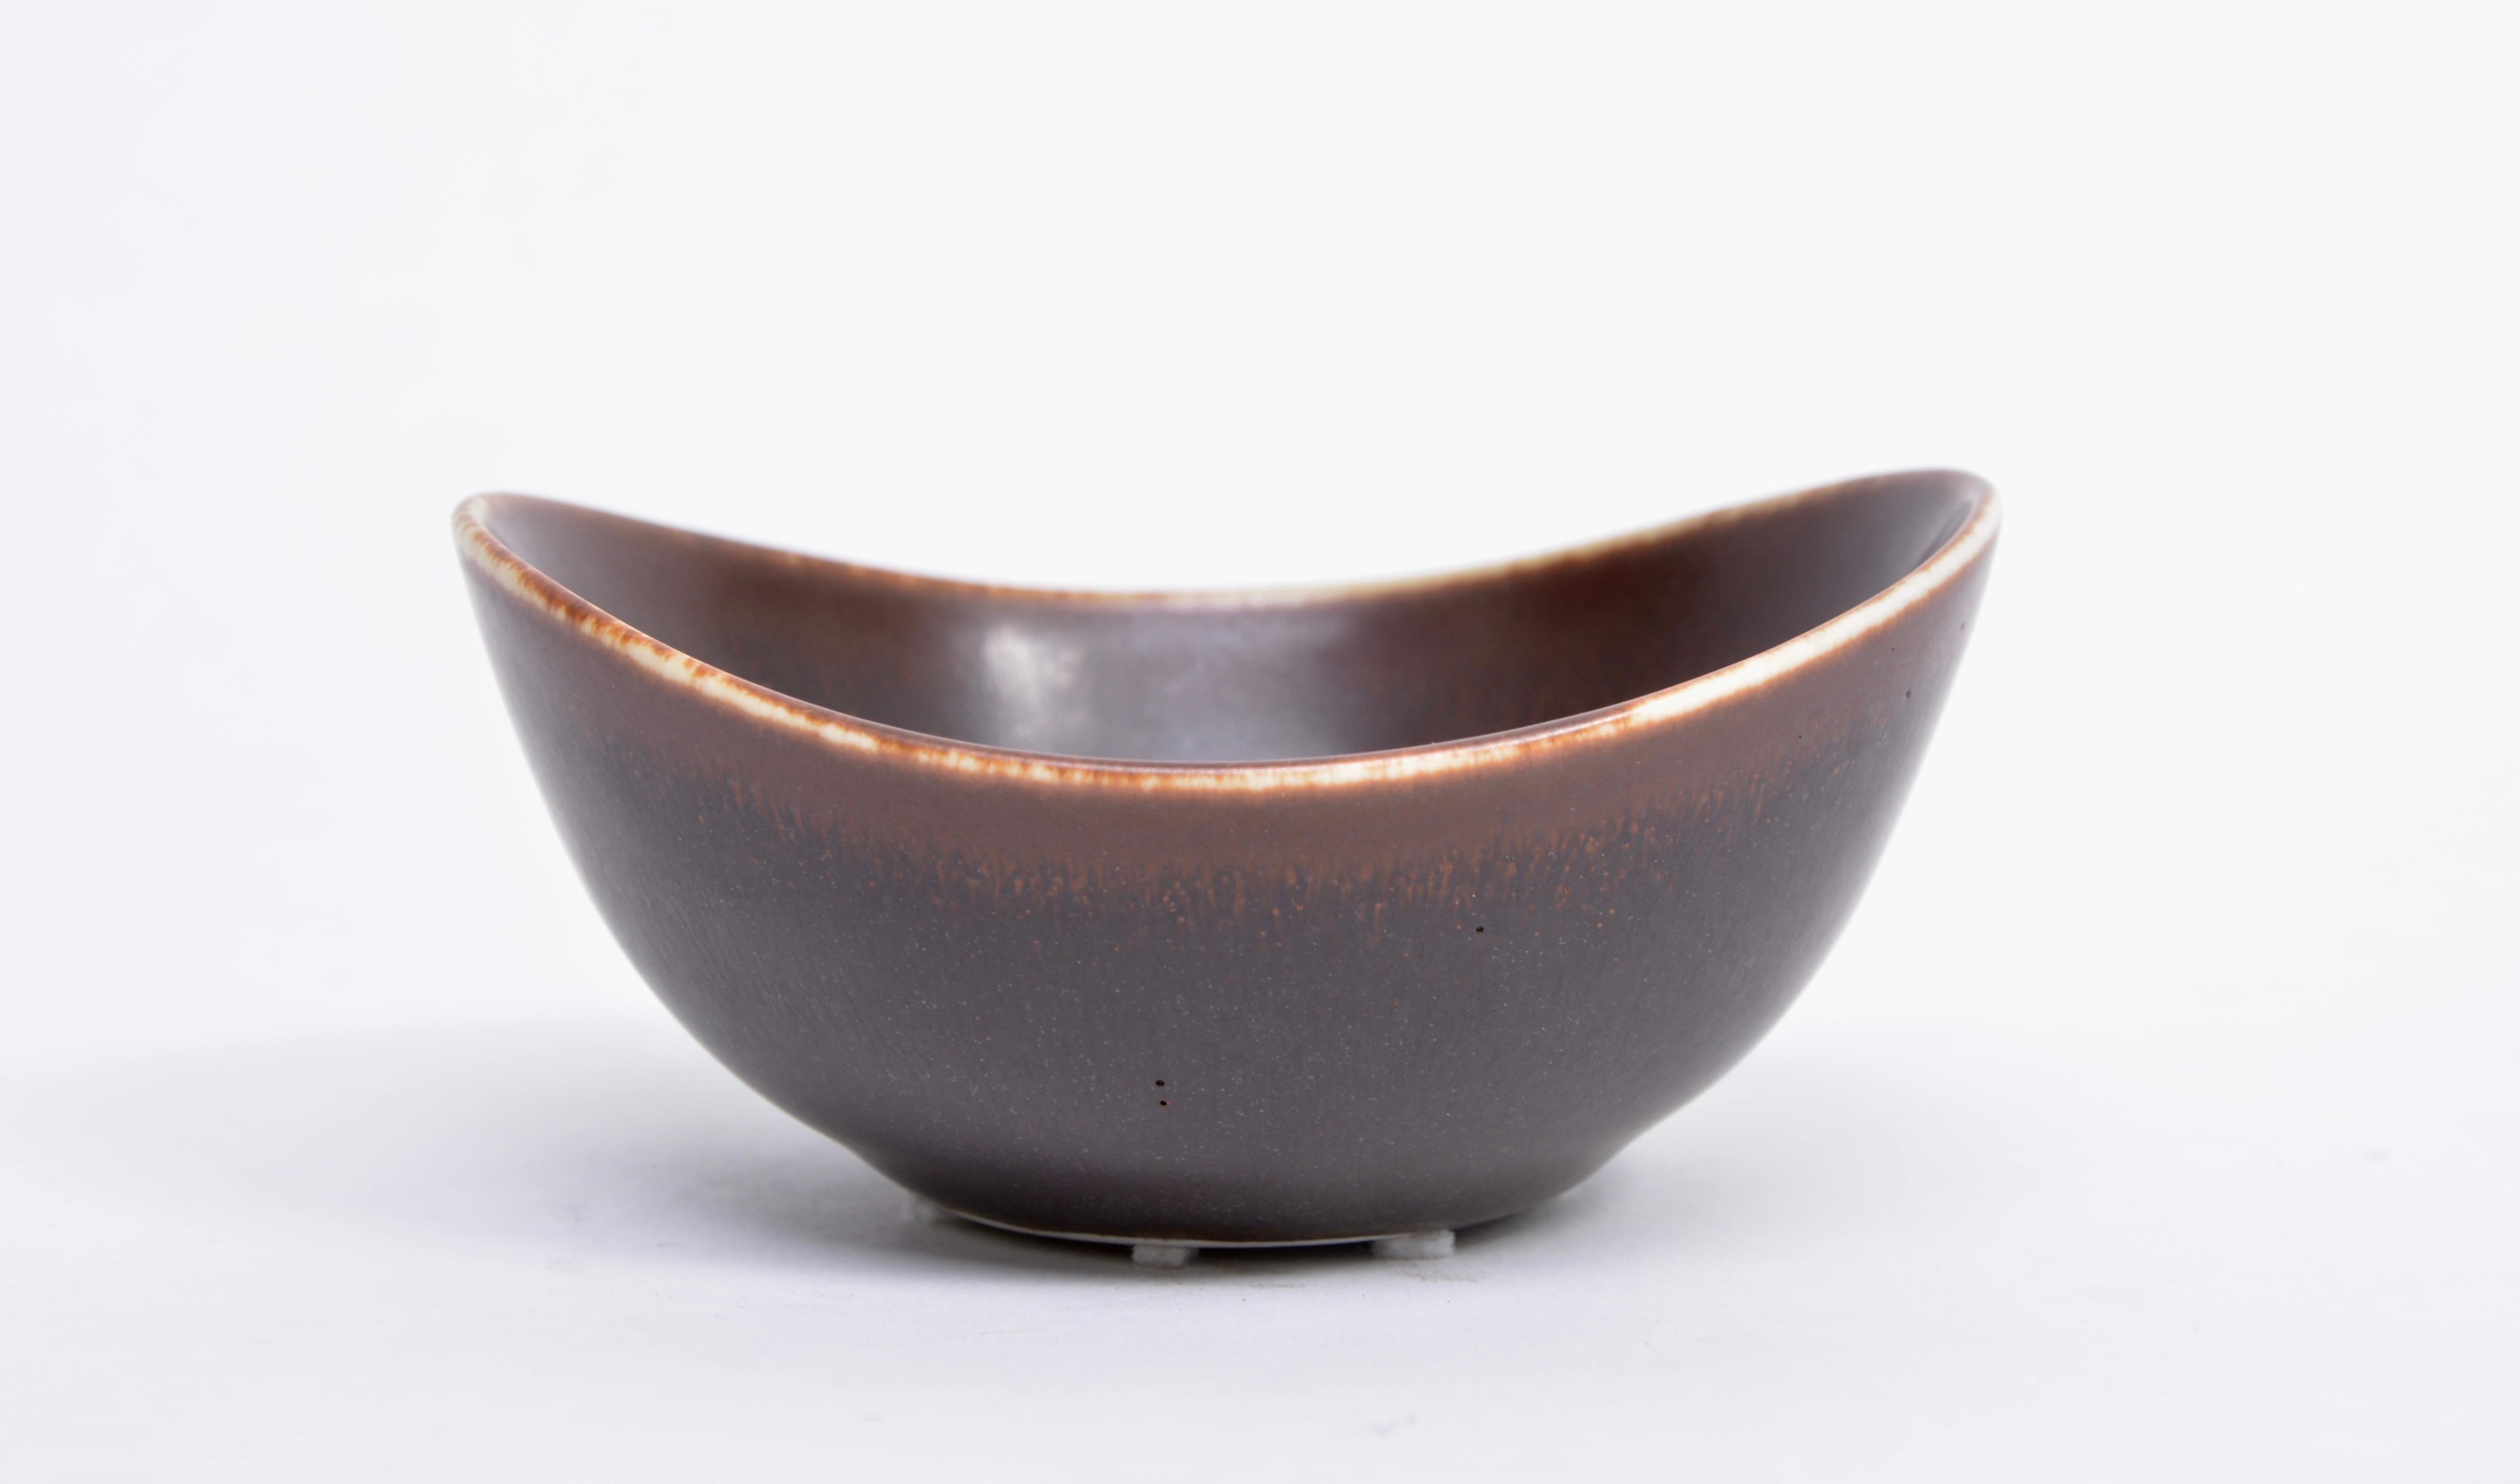 Small Brown Mid-Century Modern Ceramic bowl by Gunnar Nylund for Rörstrand

This small bowl was designed by Gunnar Nylund in the 1950s and manufactured by Rörstrand in Sweden. It is made from brown ceramic. In a very good vintage condition.